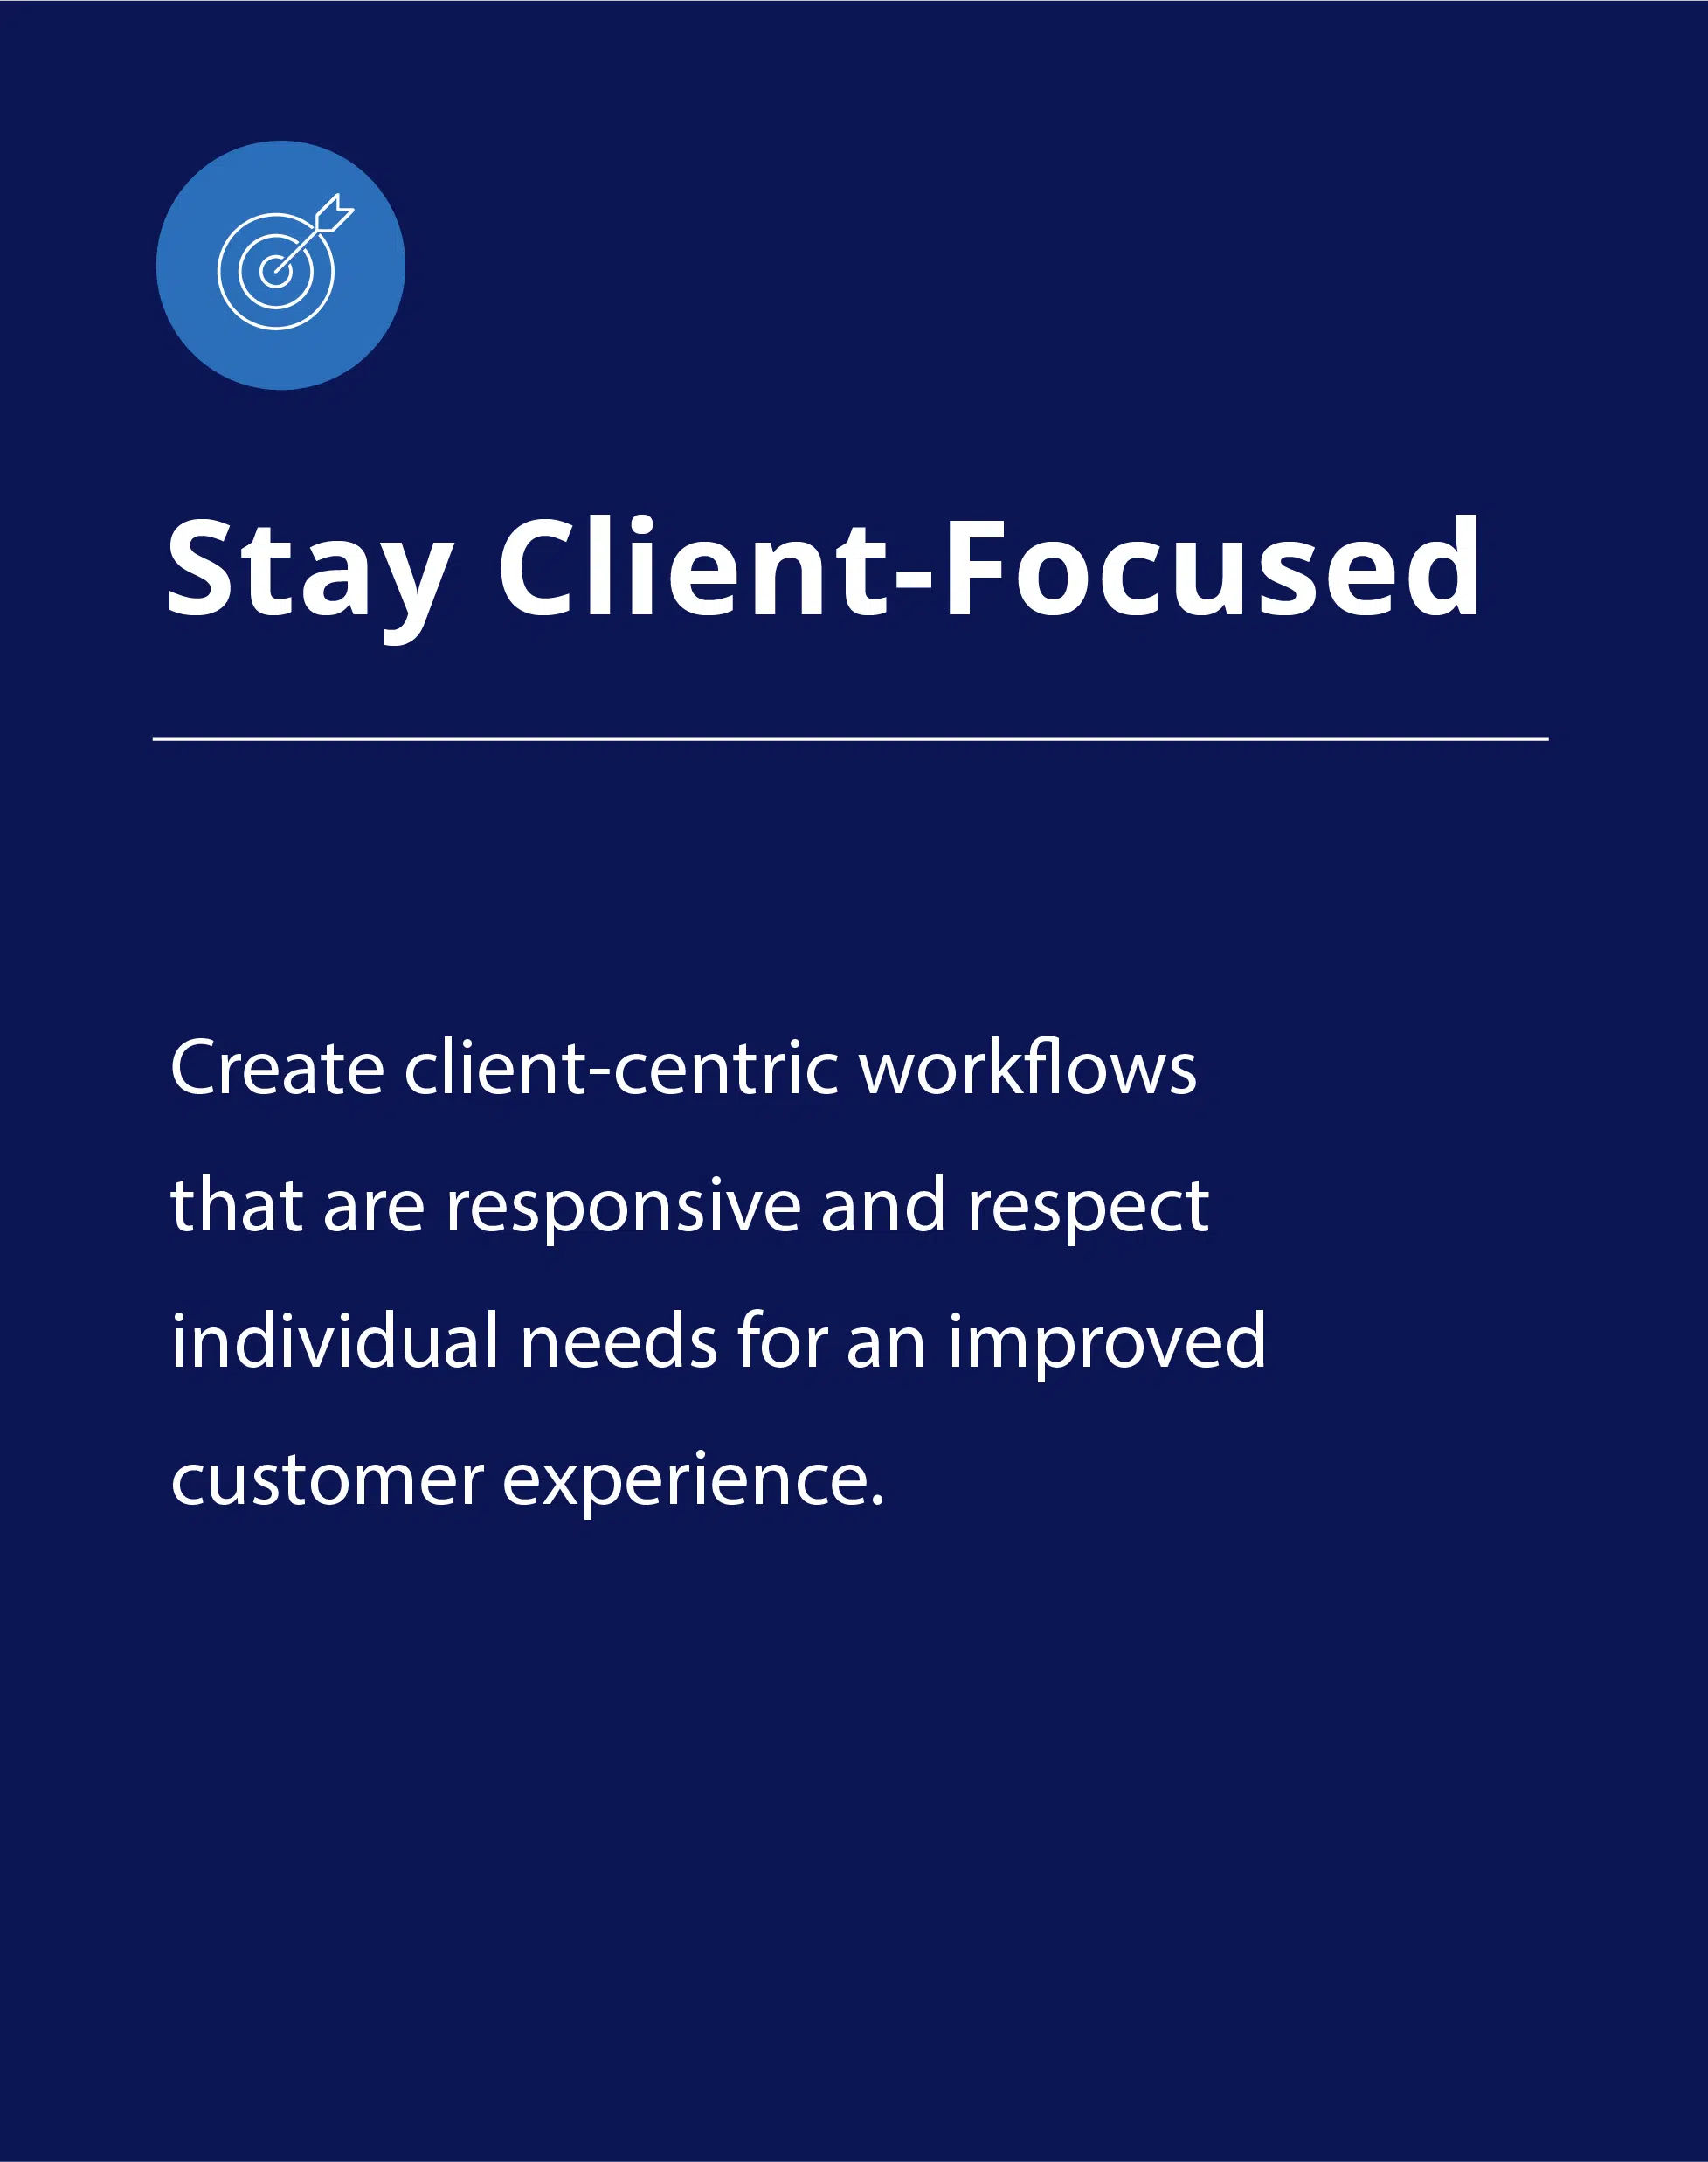 Stay Client-Focused